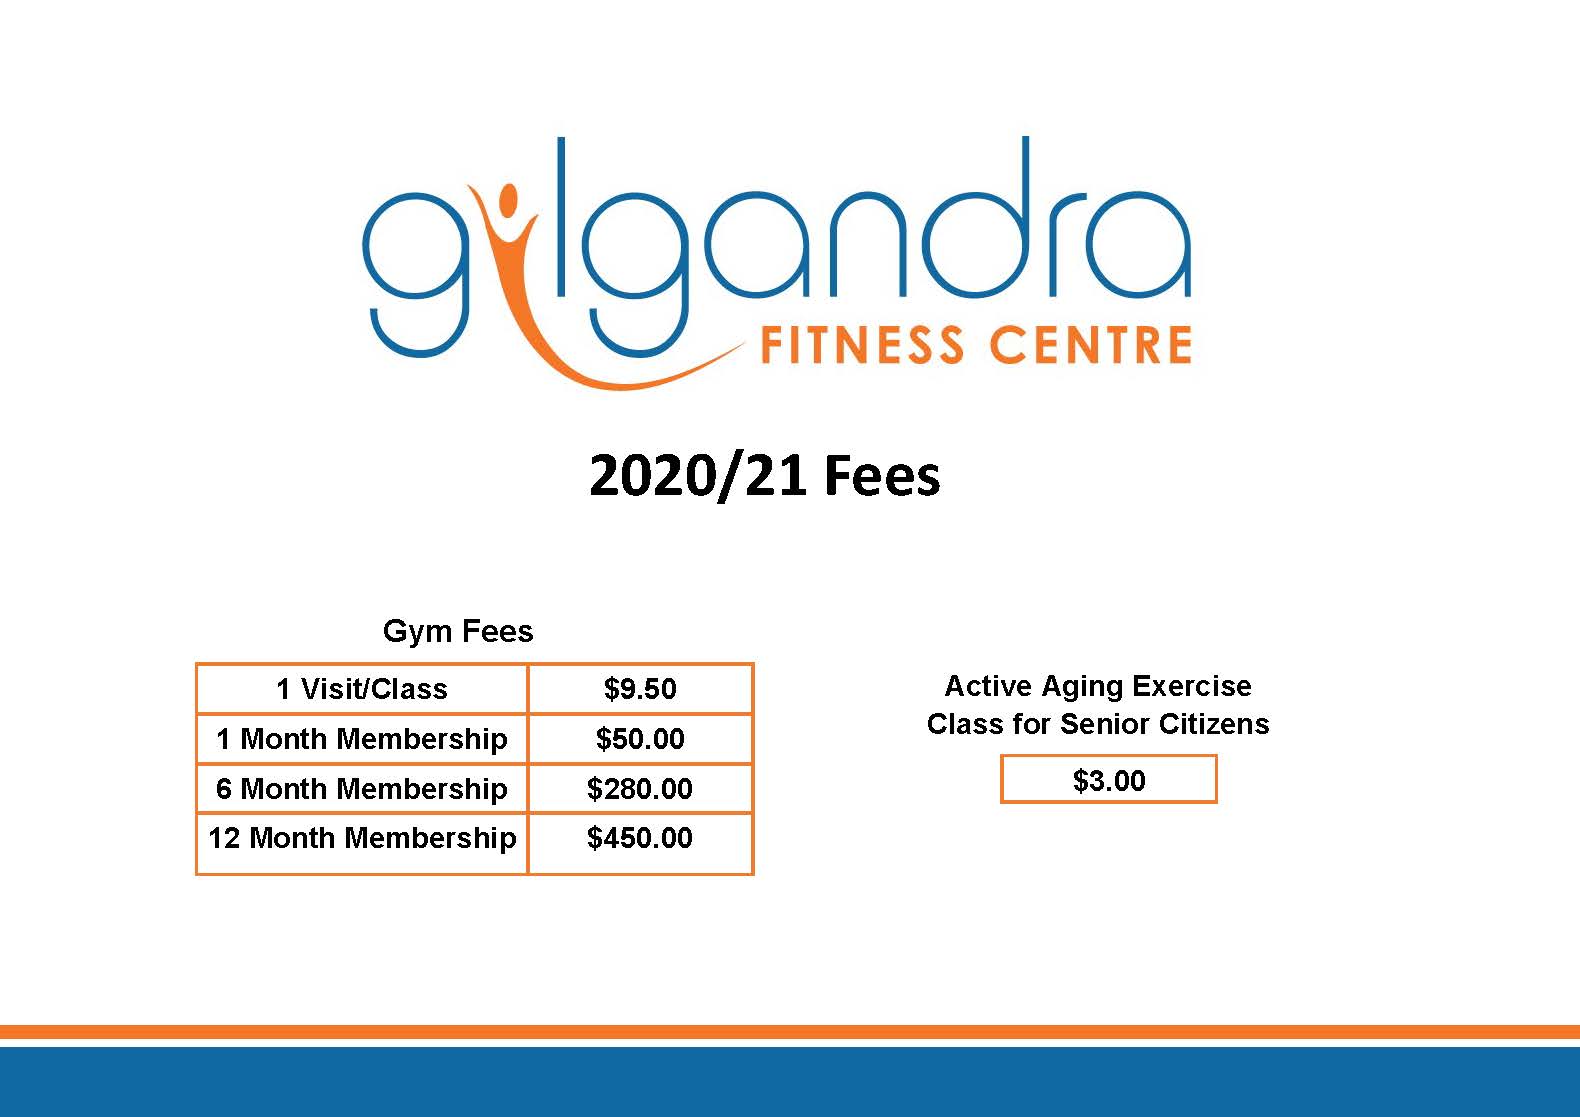 New-Prices-for-Gym-year-20-21.jpg